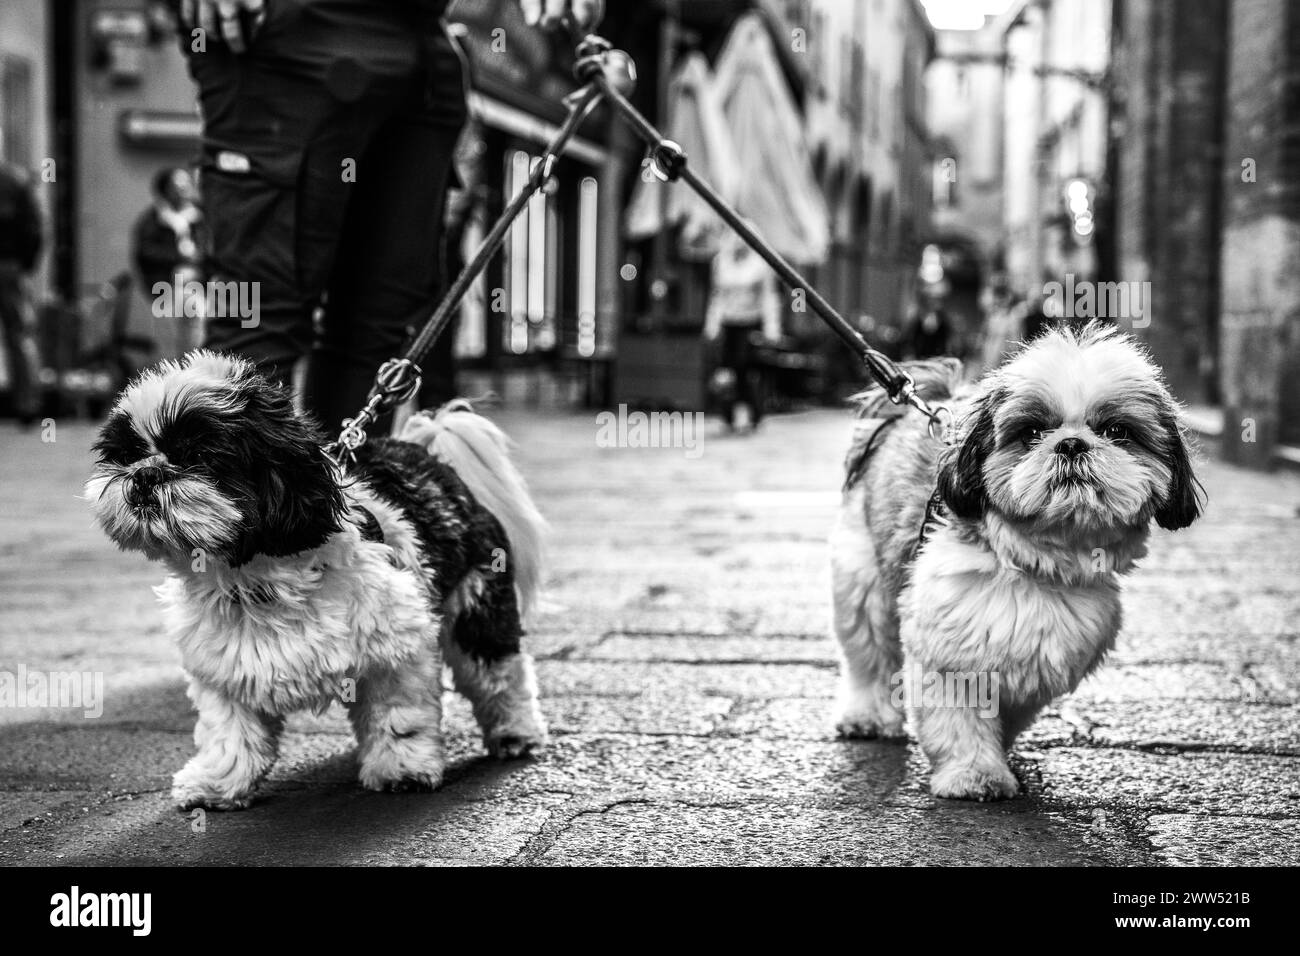 Twin Shih Tzus on a city walk, fluffy companions in step with urban life. Their expressive eyes captivate in a timeless black and white. Street photog Stock Photo